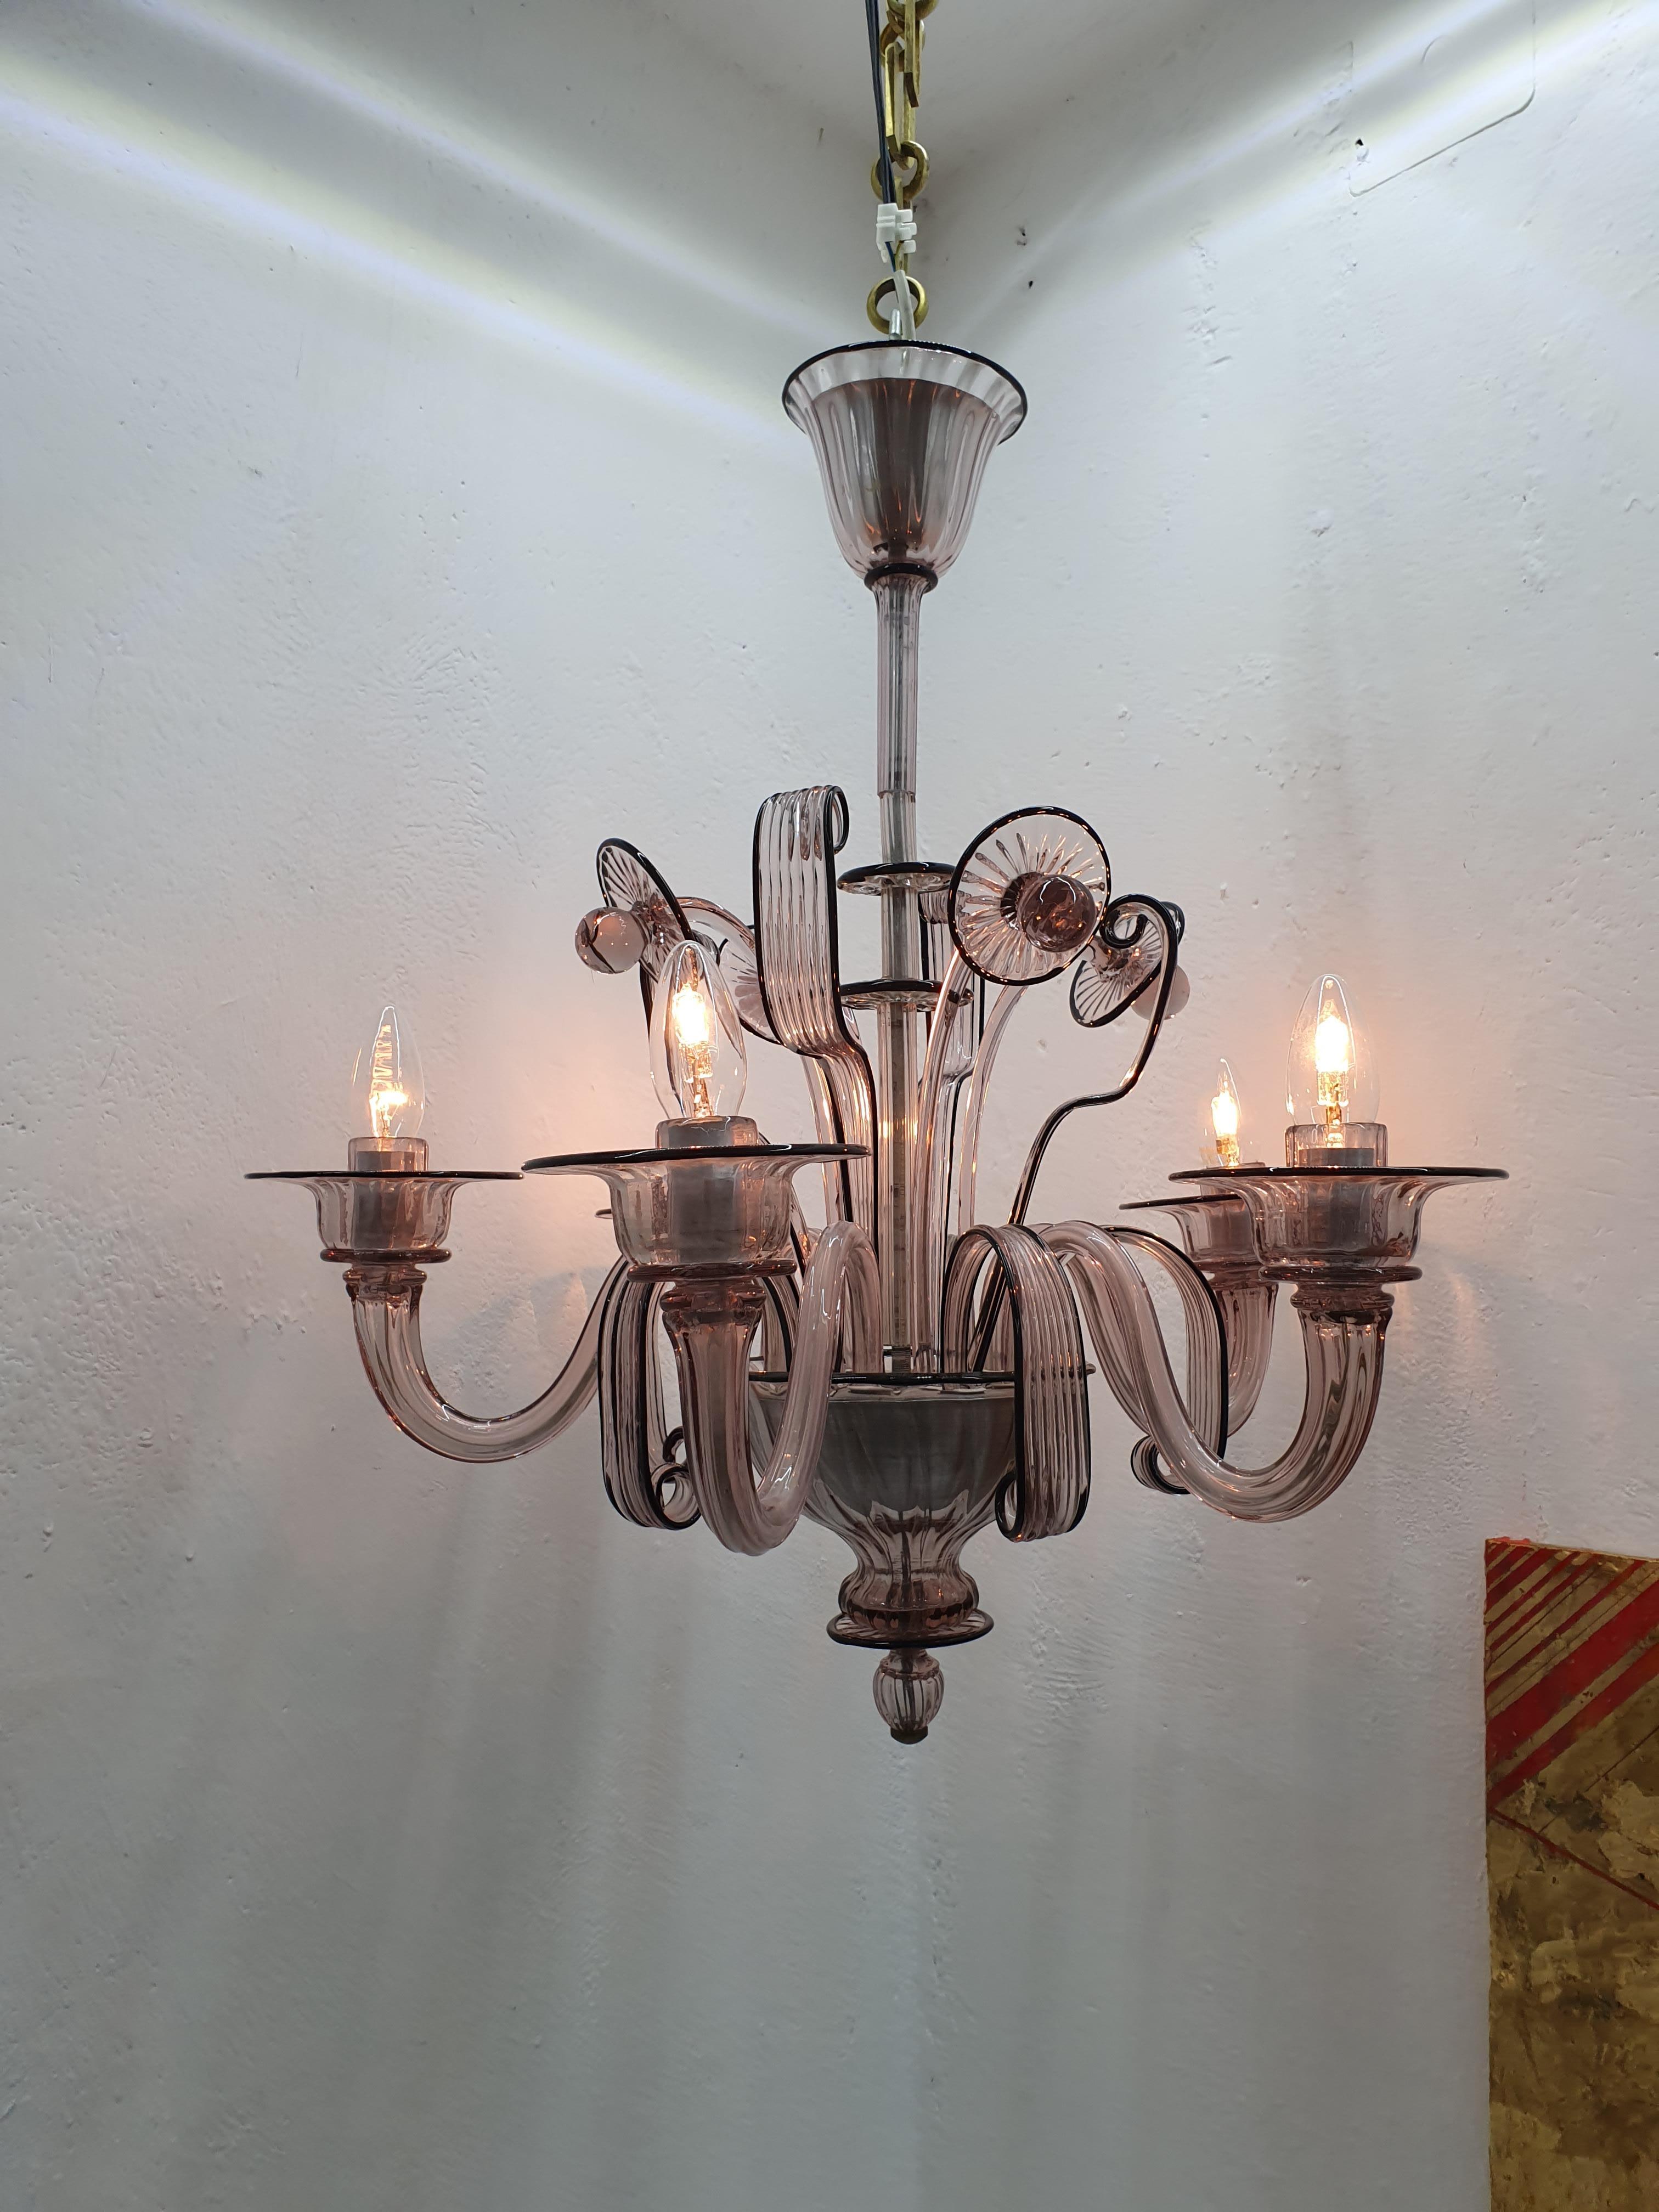 Art Deco Style Chandelier Attributed to Venini Murano Glass, Itlay, circa 1940 For Sale 9